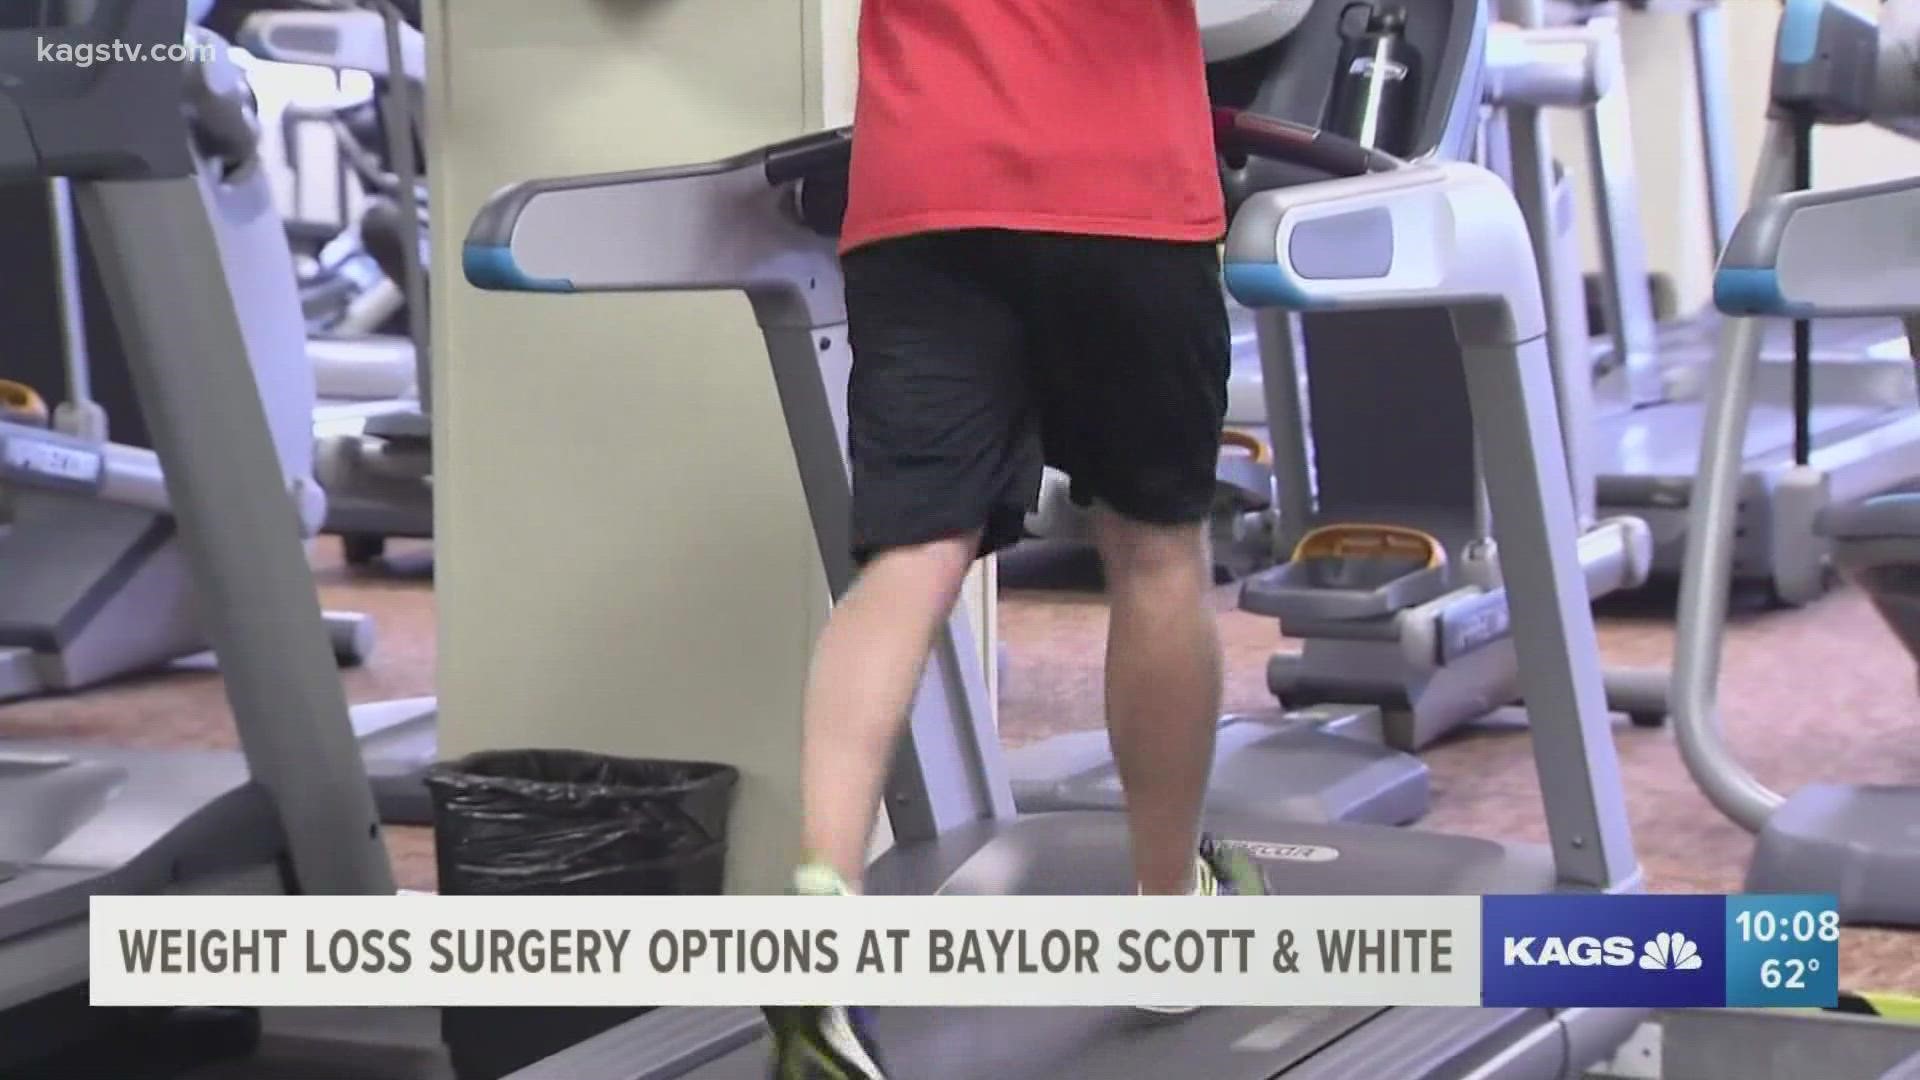 Dr. Trevor Tumlinson of Baylor Scott and White said the surgery is relatively safe and complication rates are low.